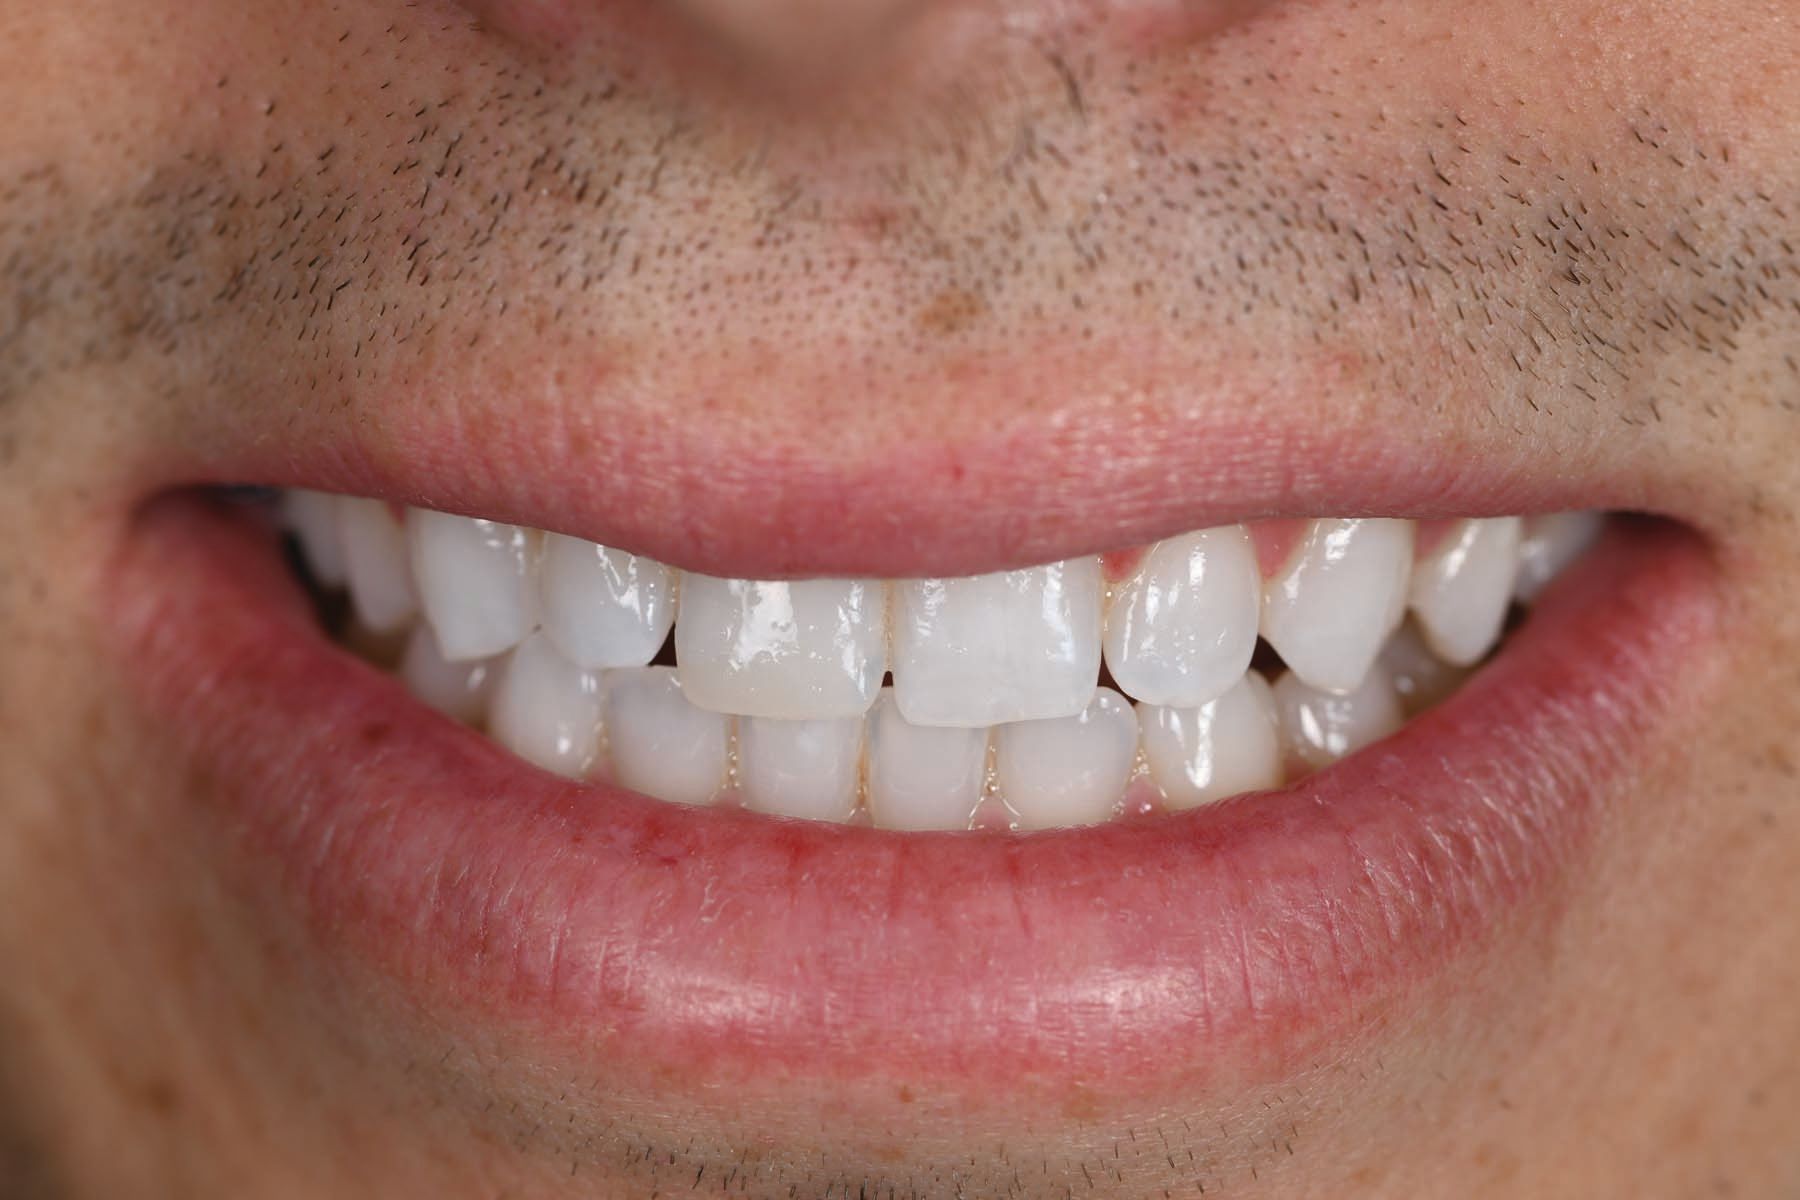 Figure 18. The highly esthetic outcome blended nicely with adjacent dentition.